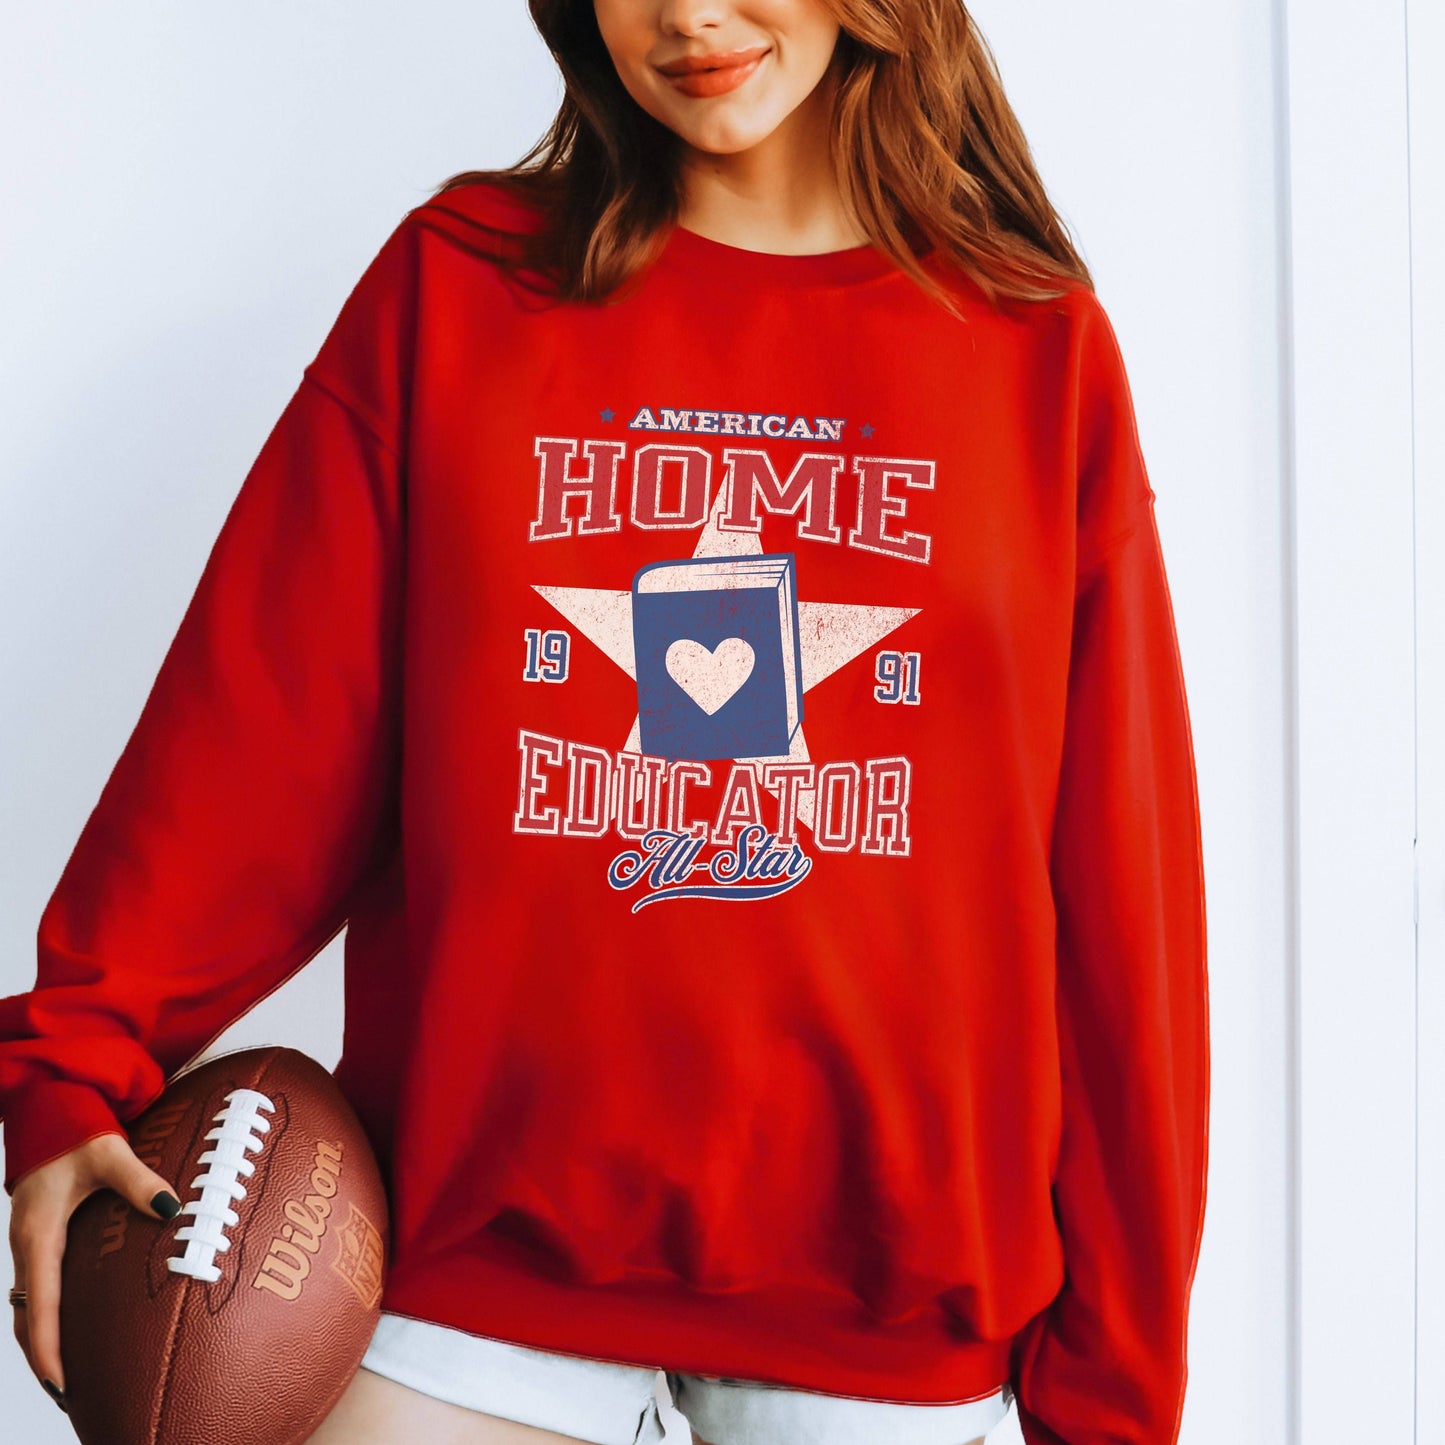 white red blue patriotic american home educator sweater sweatshirt for homeschool moms in red book heart